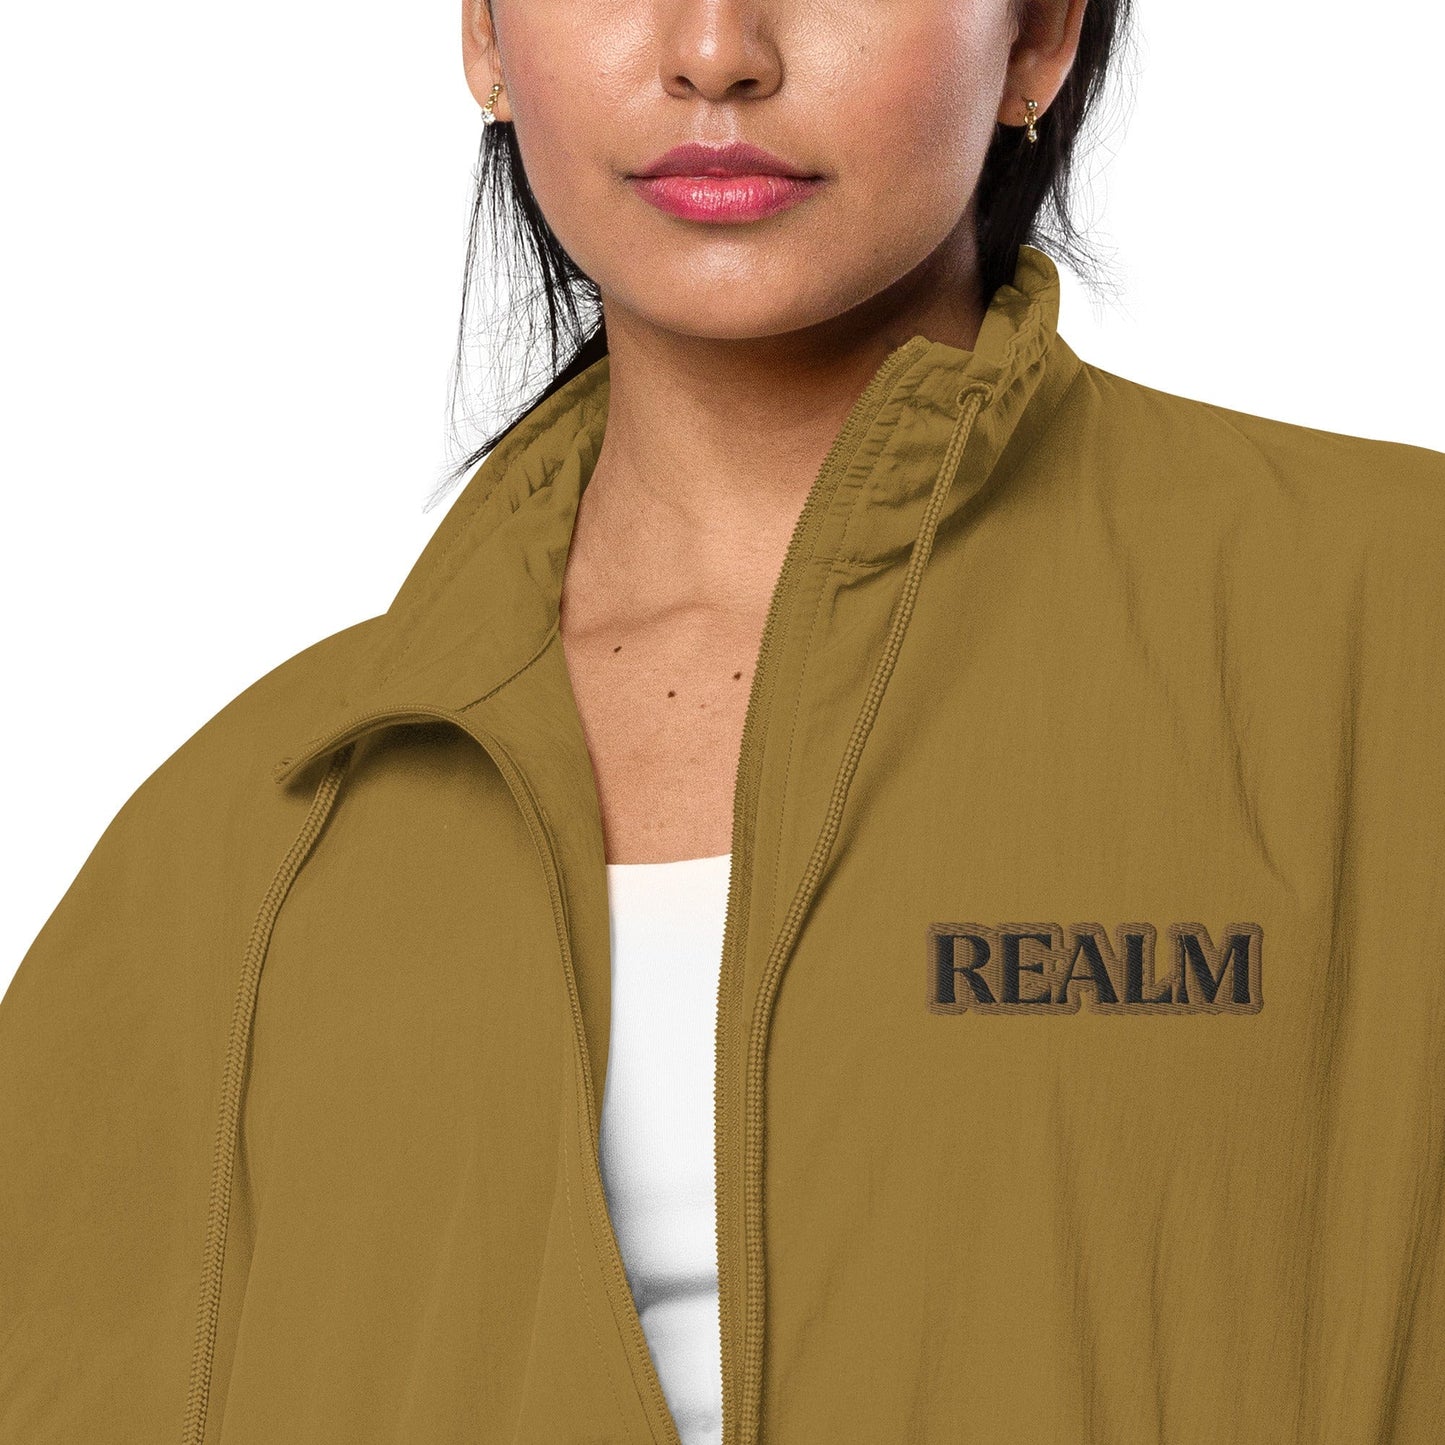 REALM Recycled Tracksuit Jacket | Realm Concept Market - Realm Concept Market